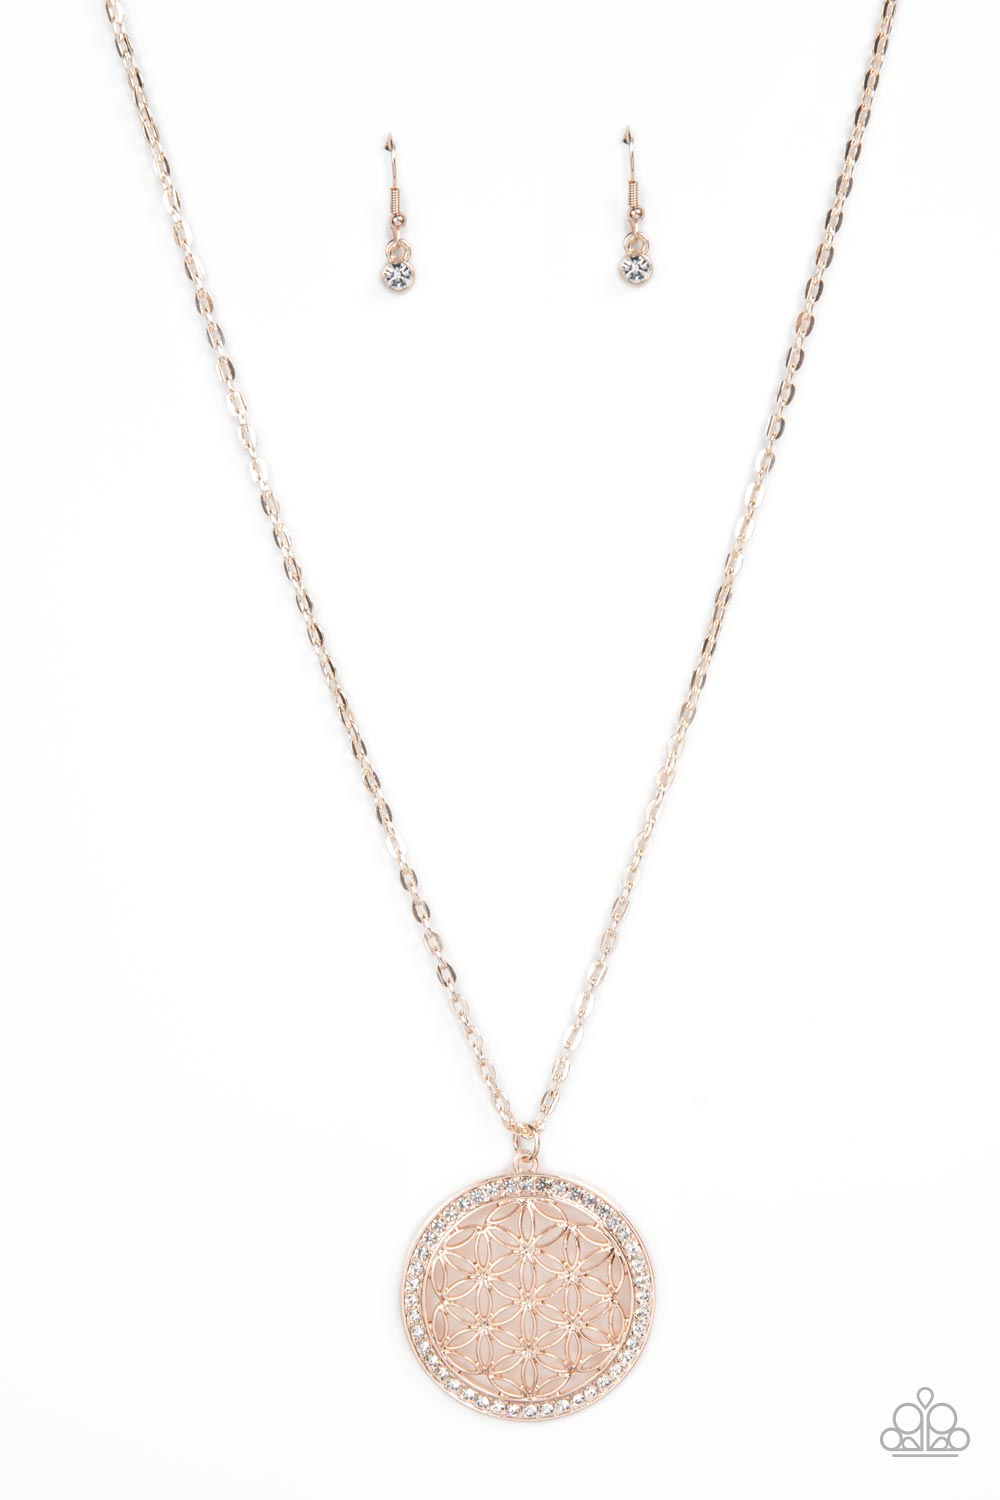 Paparazzi Necklaces - Tearoom Twinkle - Rose Gold